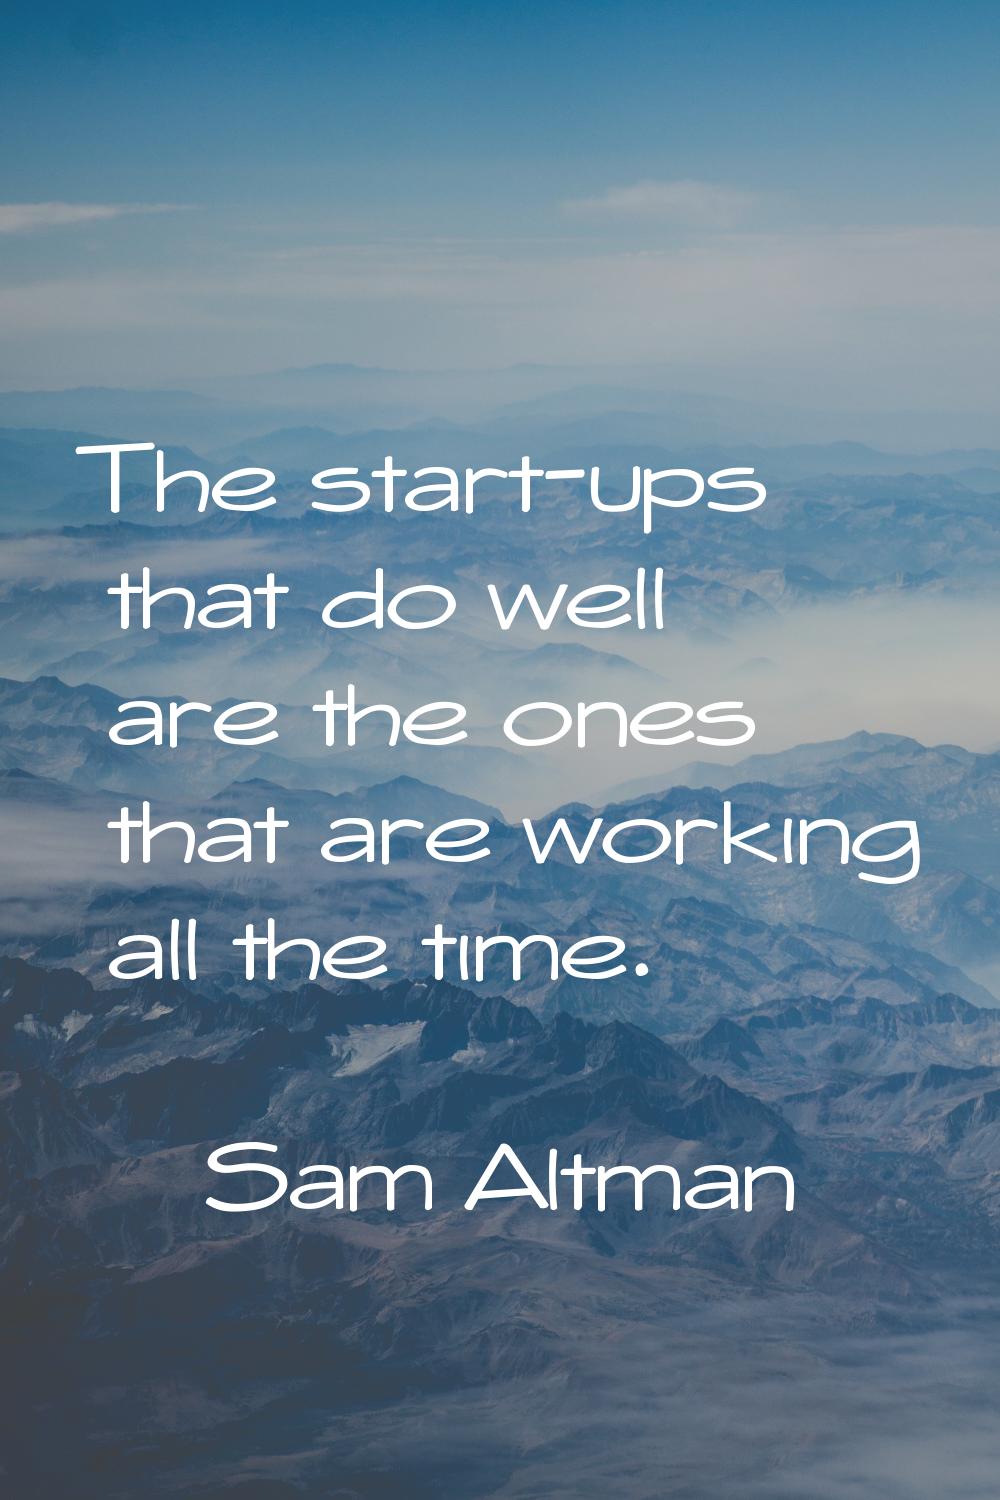 The start-ups that do well are the ones that are working all the time.